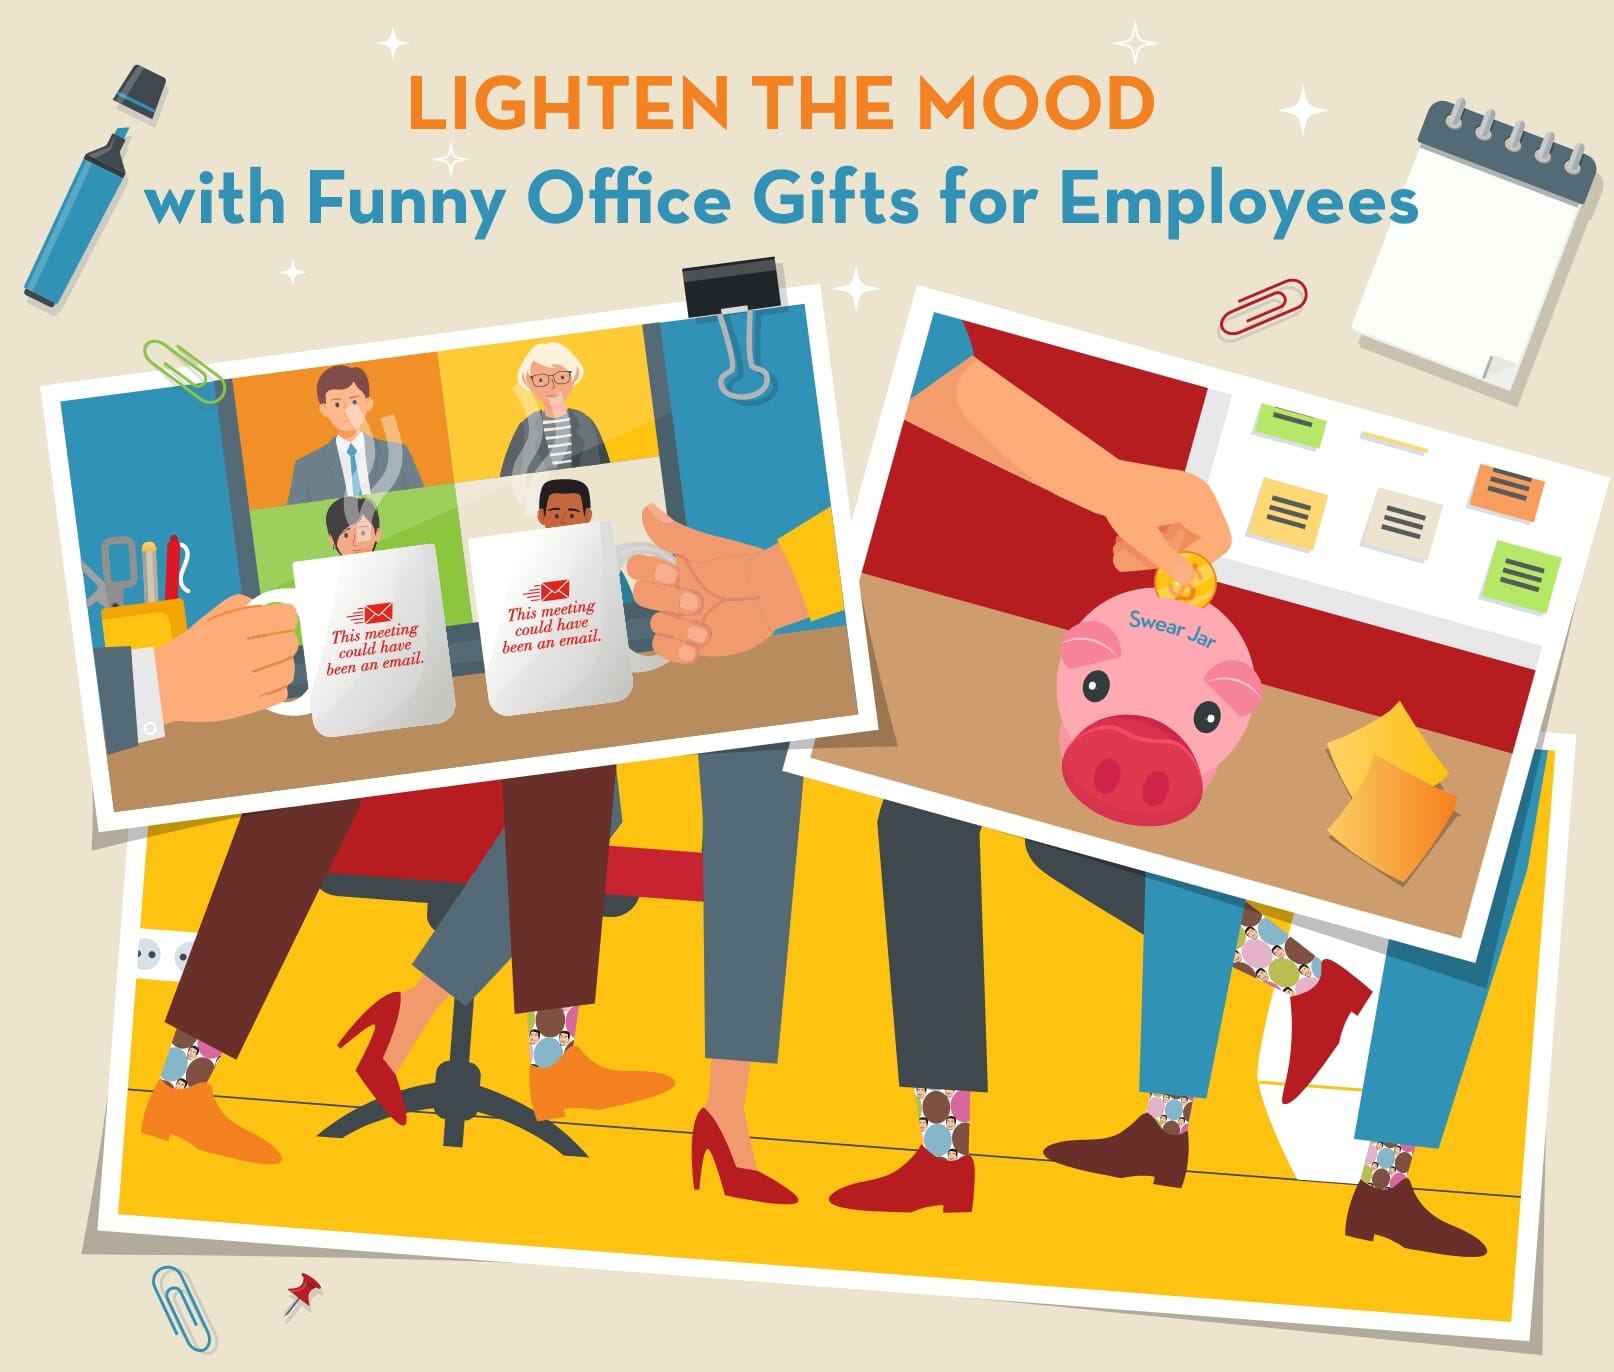 Lighten the Mood with Funny Office Gifts for Employees